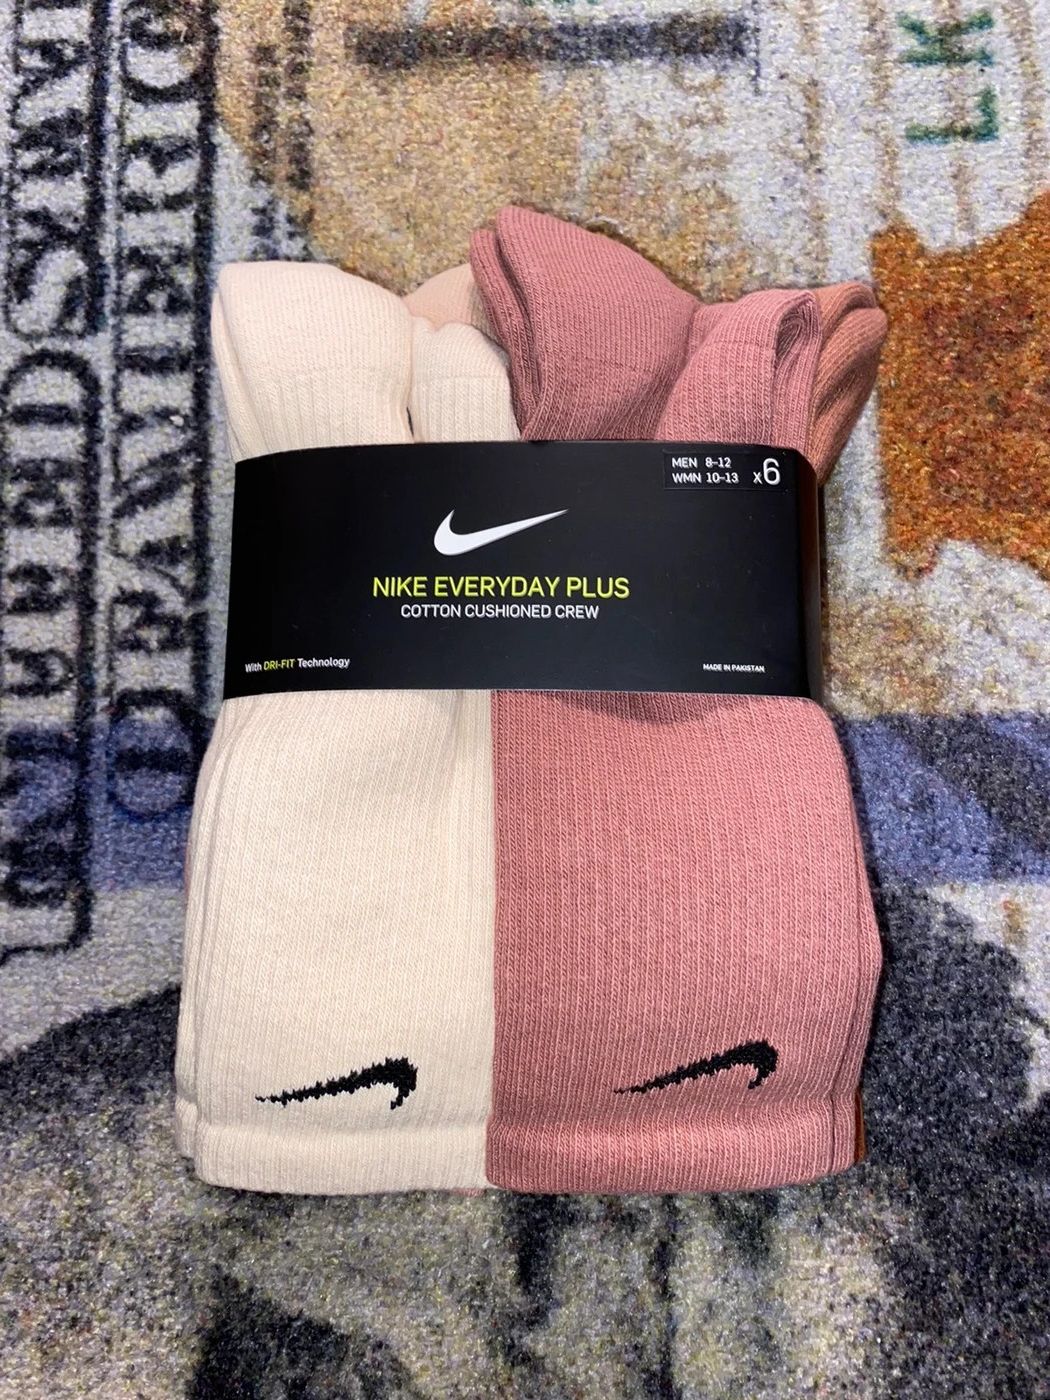 Nike Nike Everyday Plus Cushioned Crew Socks (6 PACK) LARGE Size ONE SIZE - 1 Preview